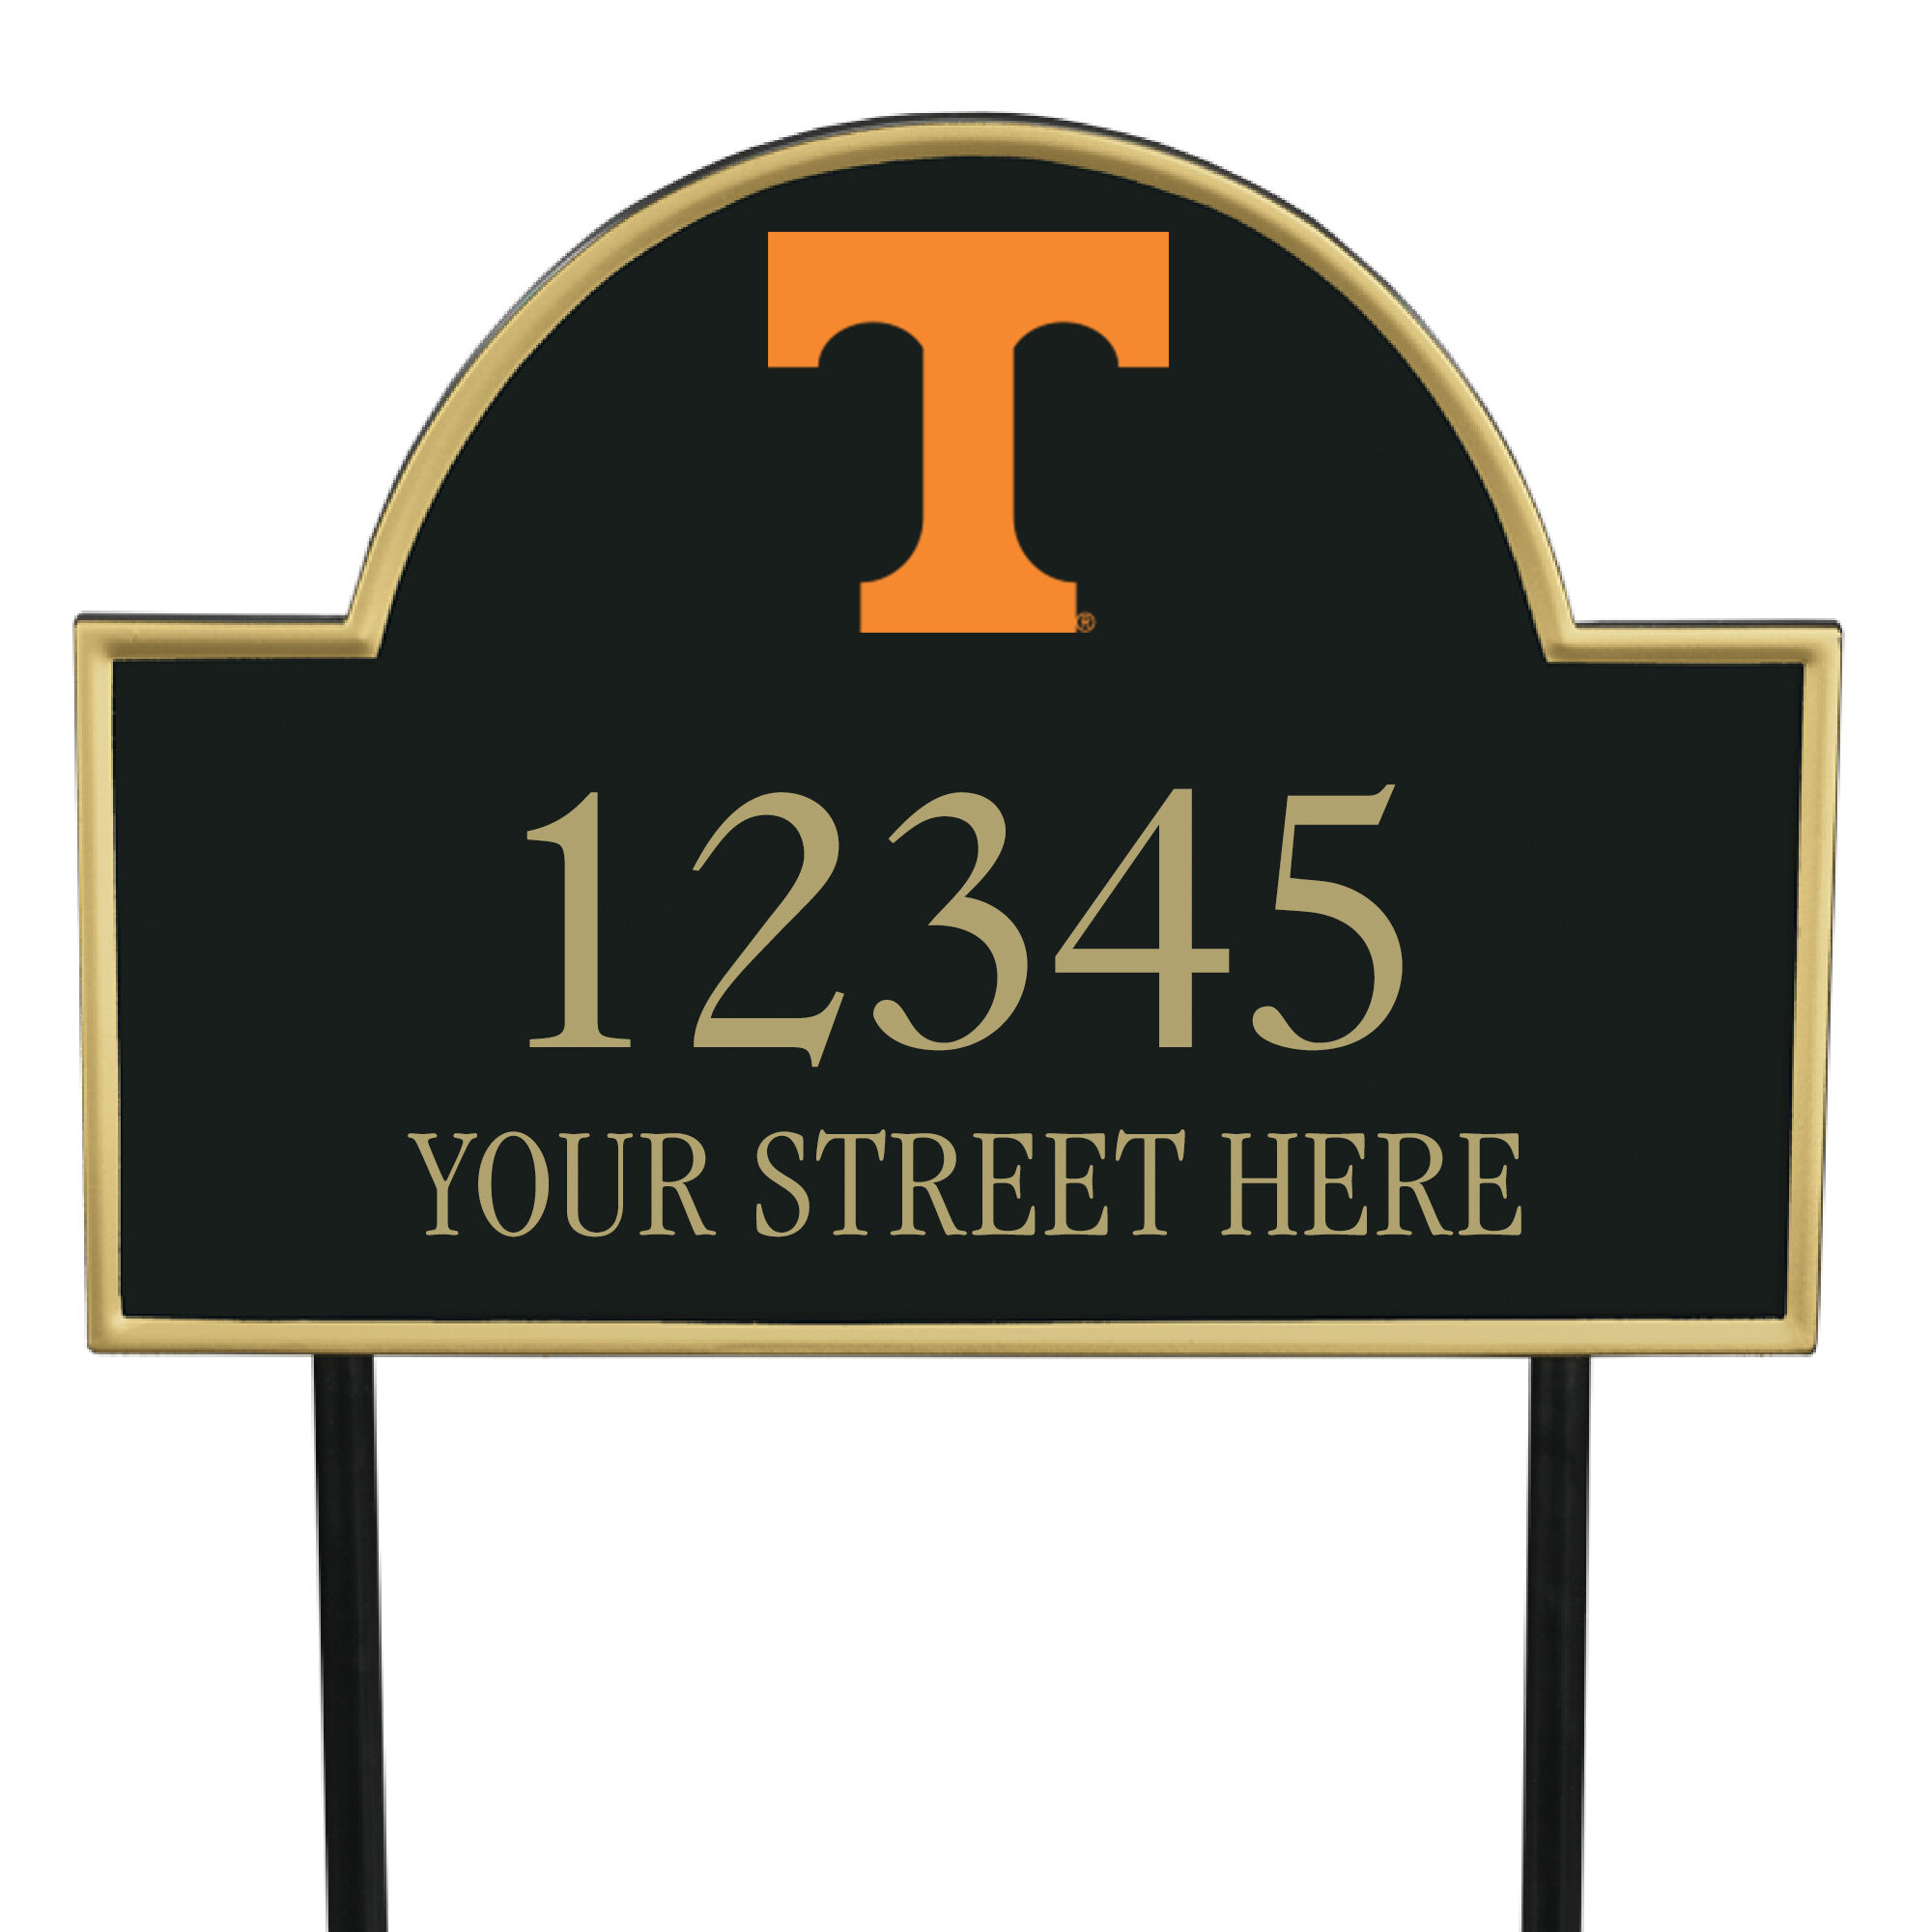 The College Personalized Address Plaque 5716 0384 b Tennessee